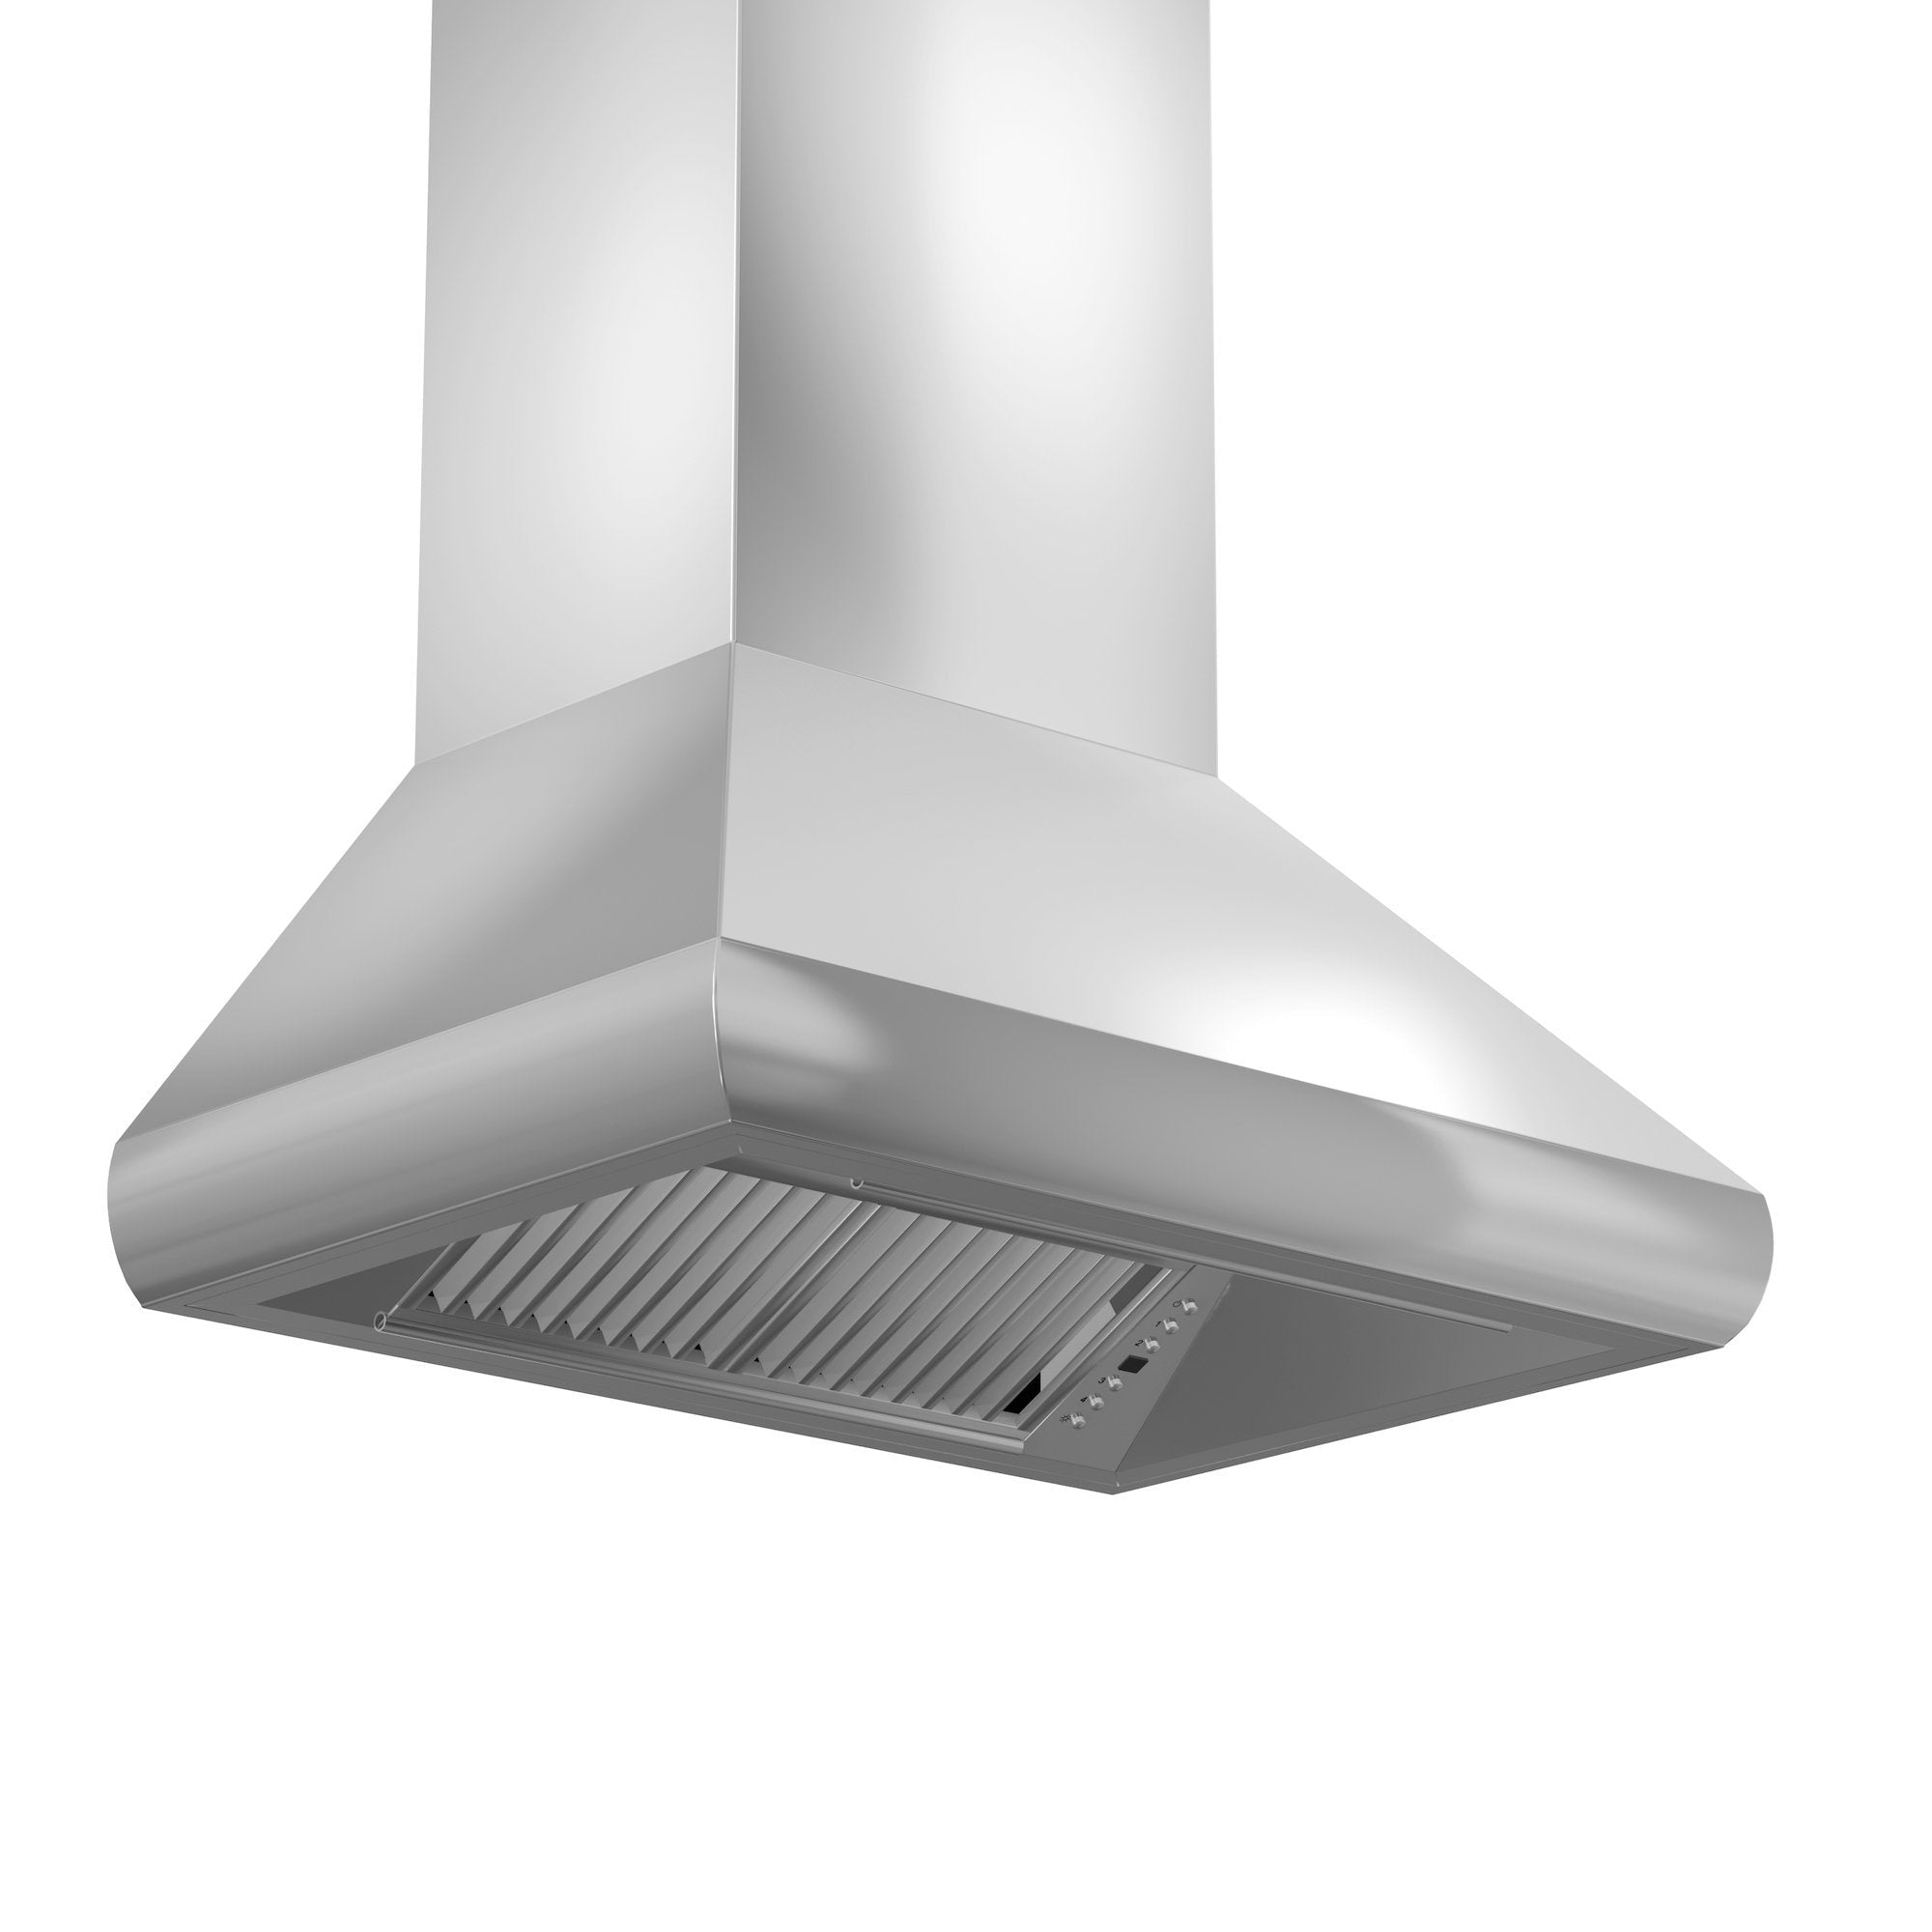 ZLINE 48" Professional Ducted Wall Mount Range Hood in Stainless Steel (687-48)